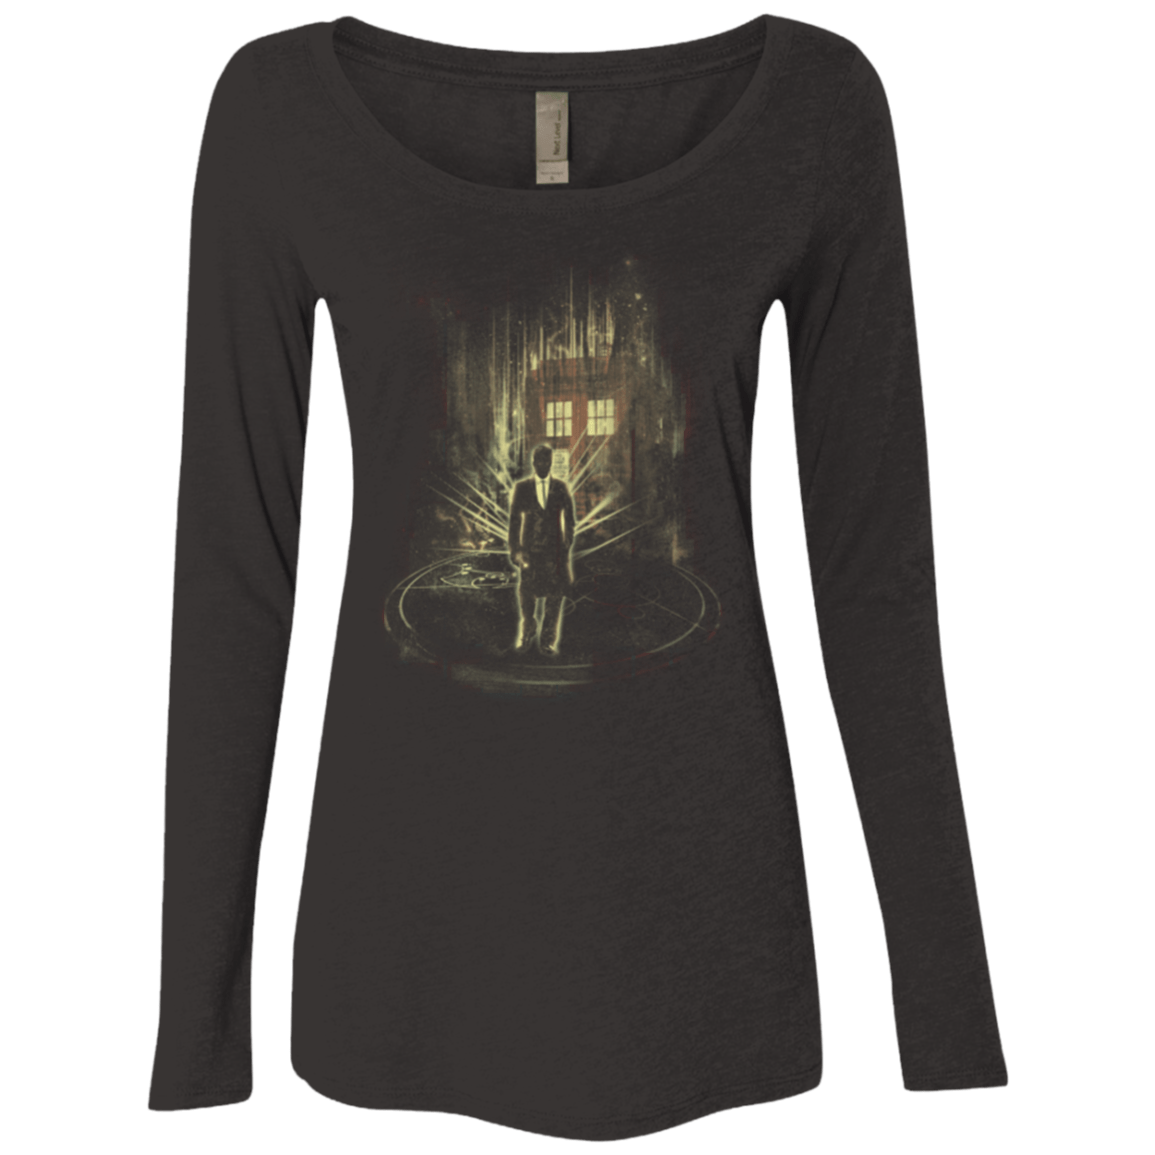 T-Shirts Vintage Black / Small I Am The Doctor Women's Triblend Long Sleeve Shirt